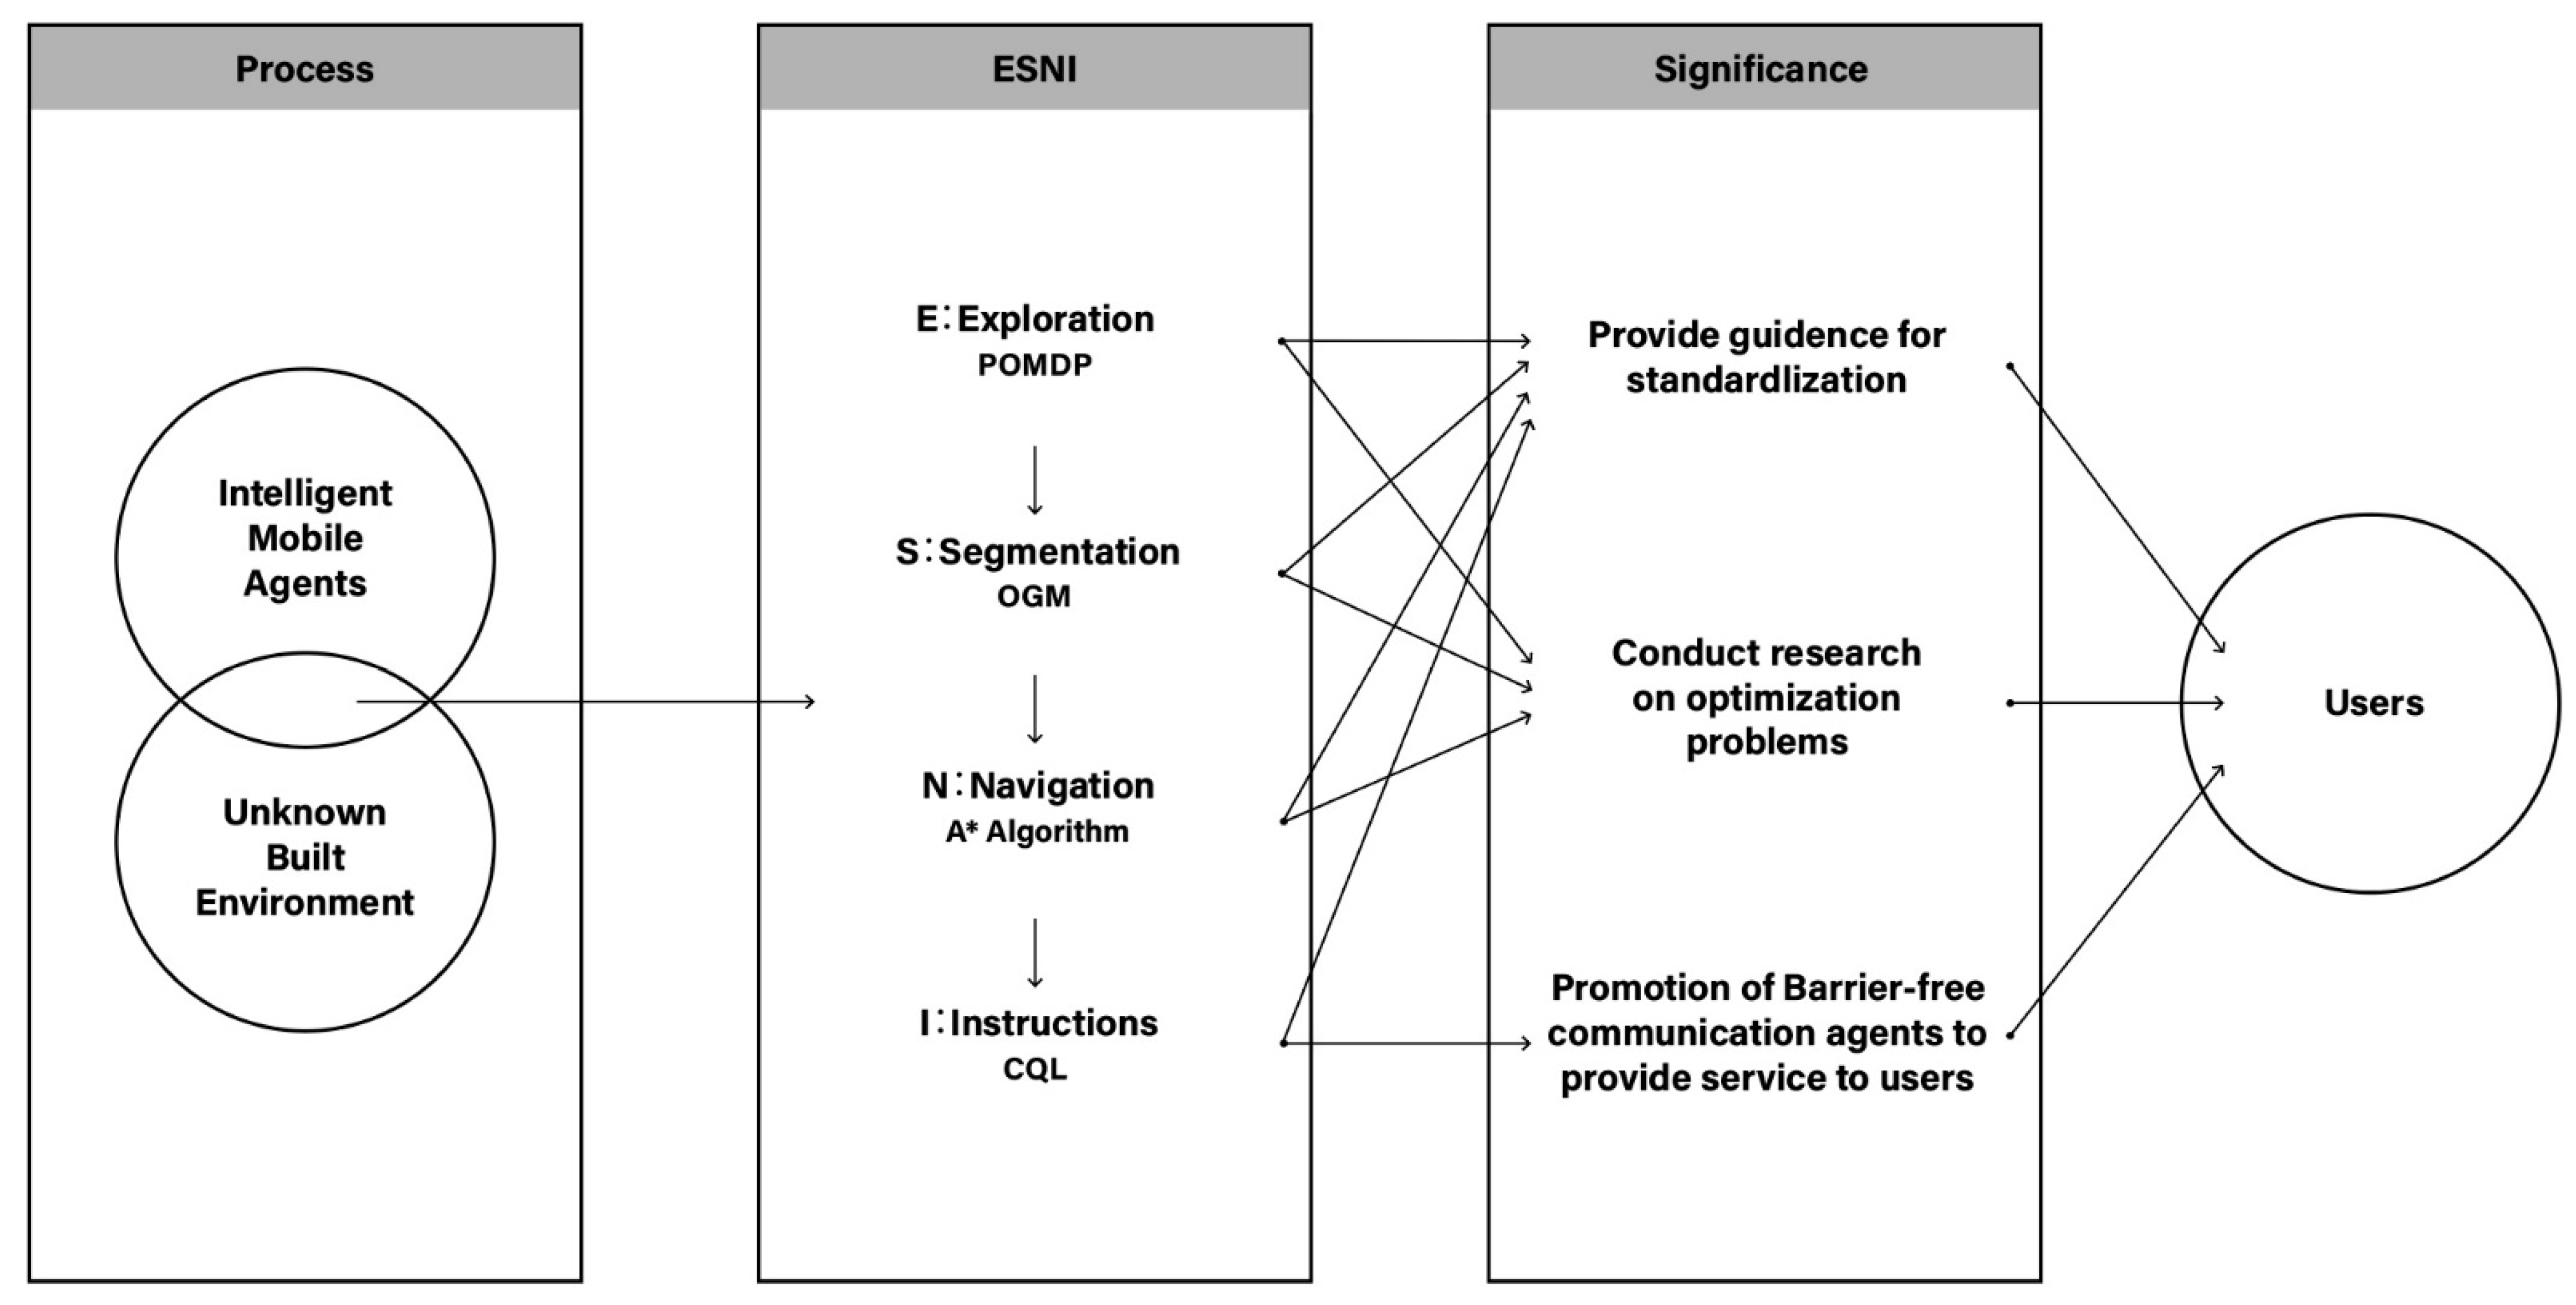 Sensors | Free Full-Text | A Design Framework of Exploration, Segmentation,  Navigation, and Instruction (ESNI) for the Lifecycle of Intelligent Mobile  Agents as a Method for Mapping an Unknown Built Environment